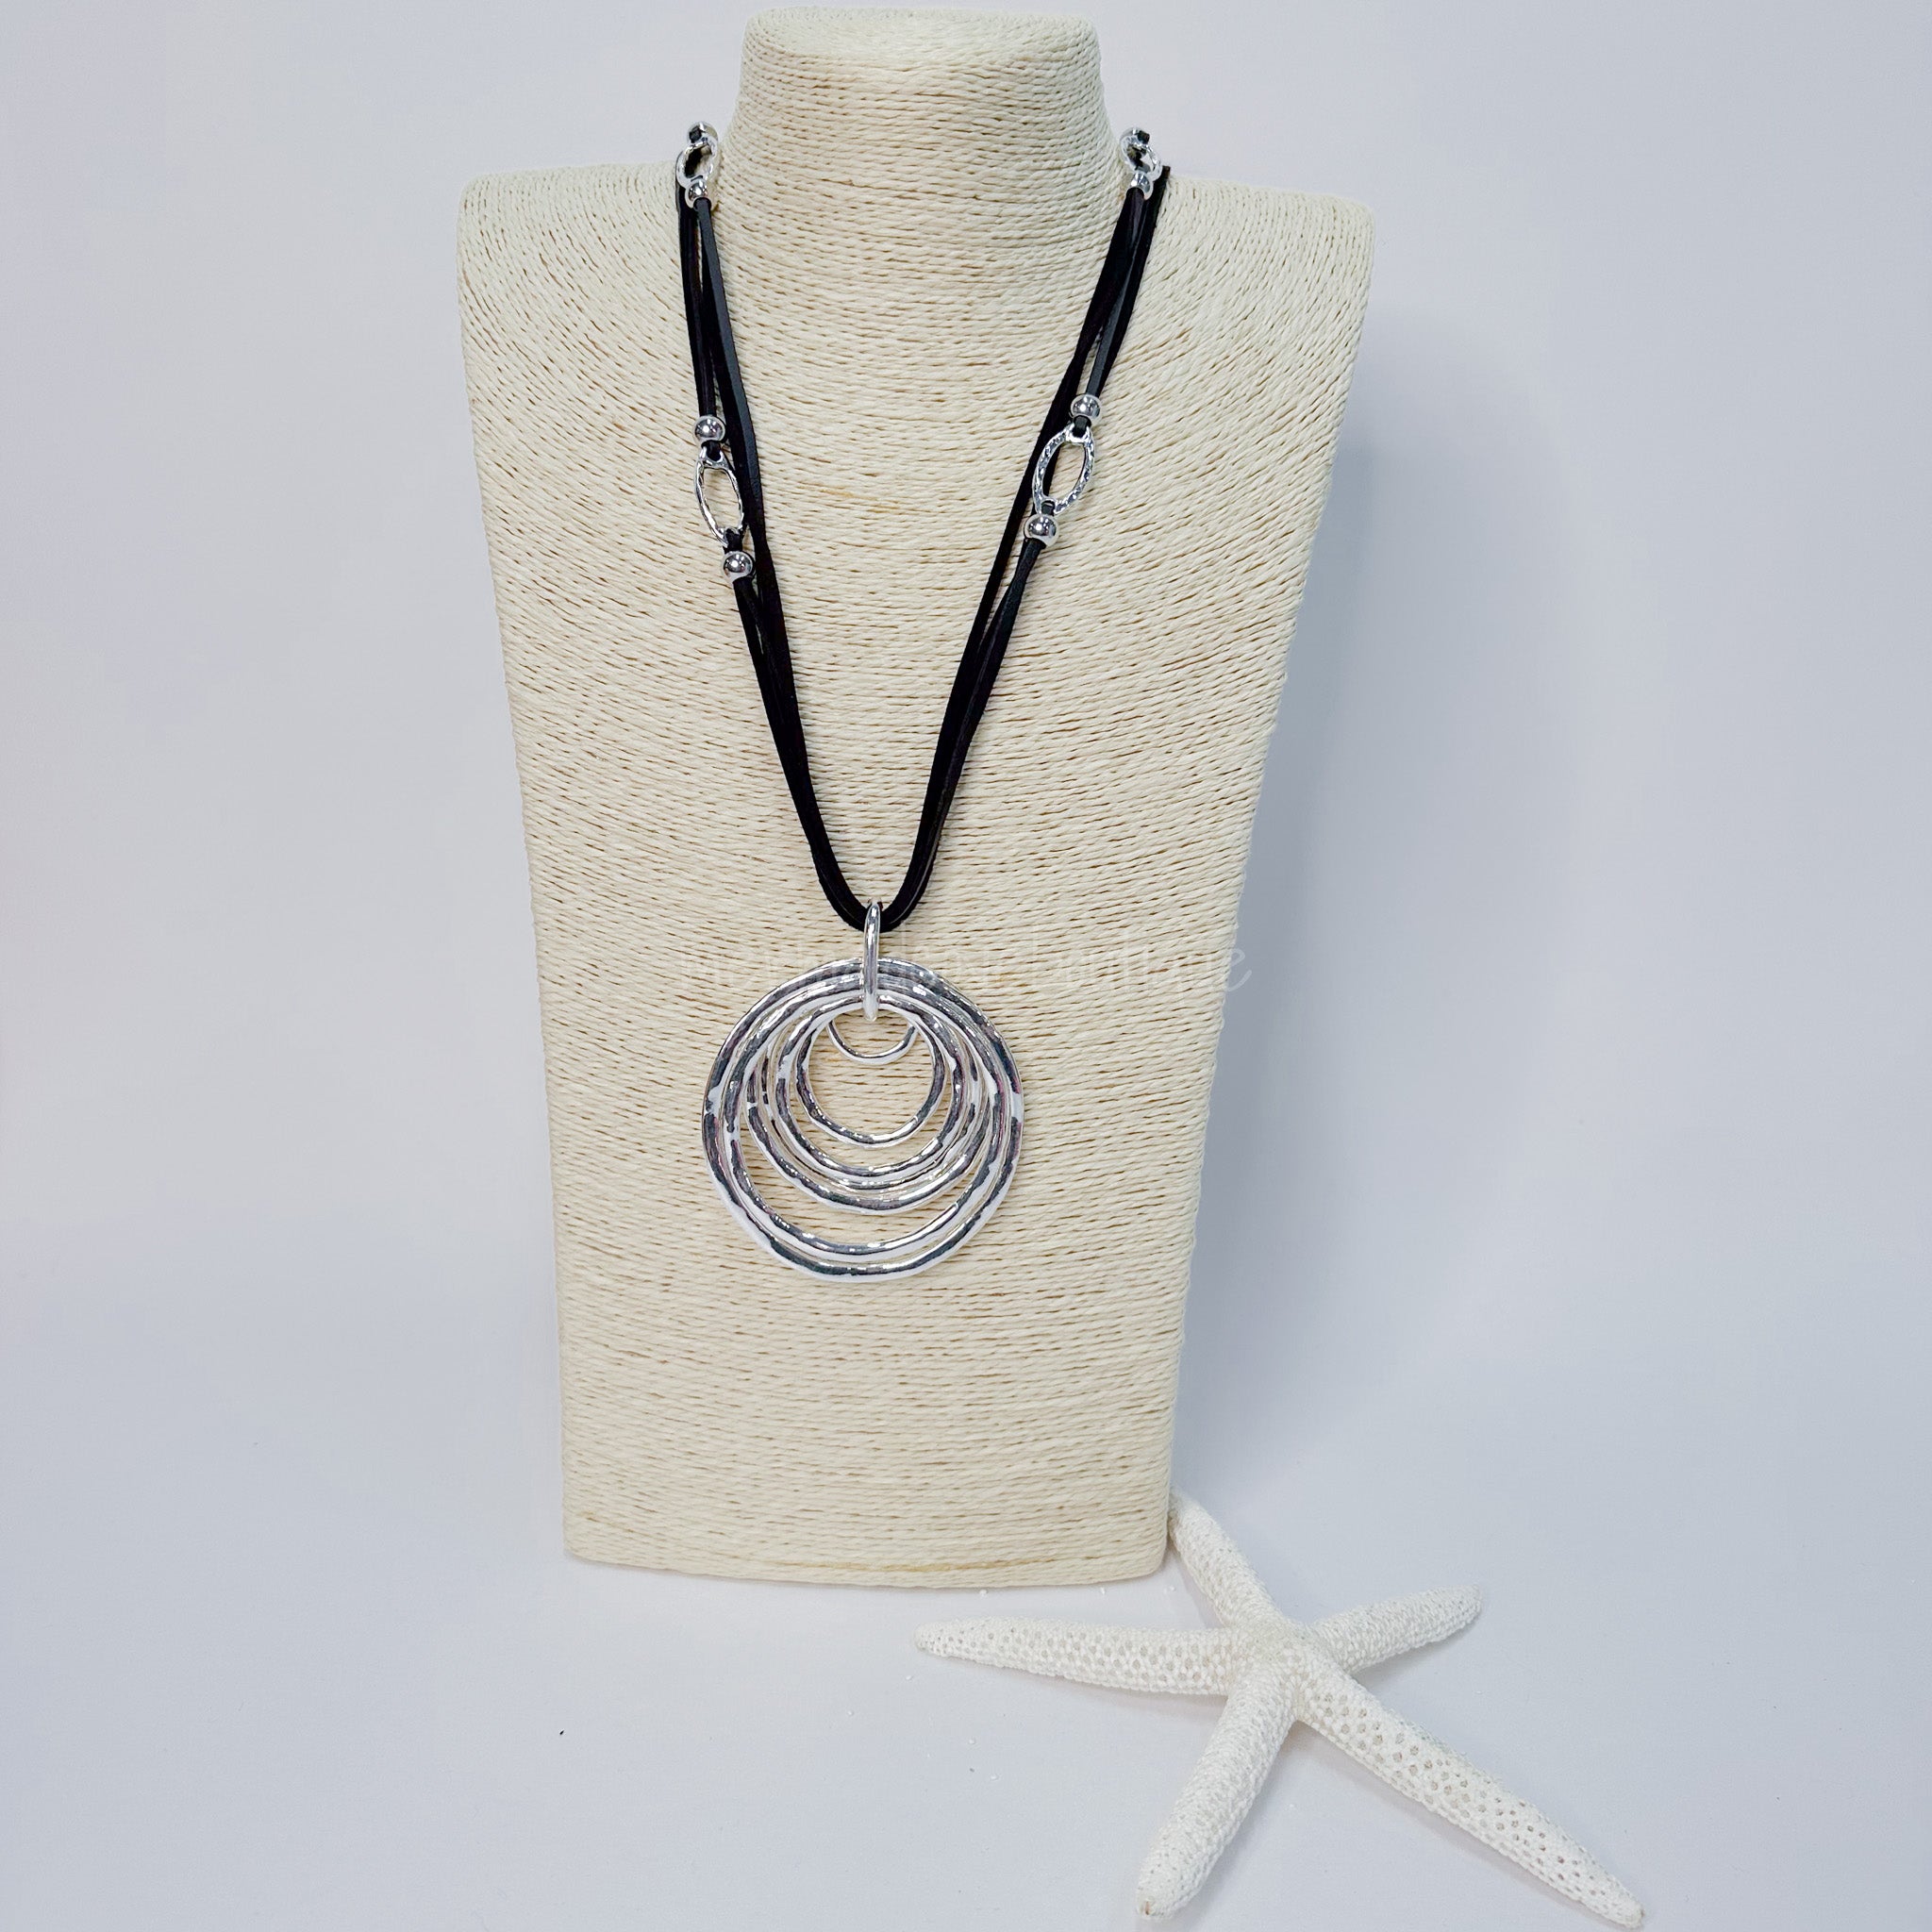 Double Circle Hollow Leather Cord Necklace. Long Necklace with Big